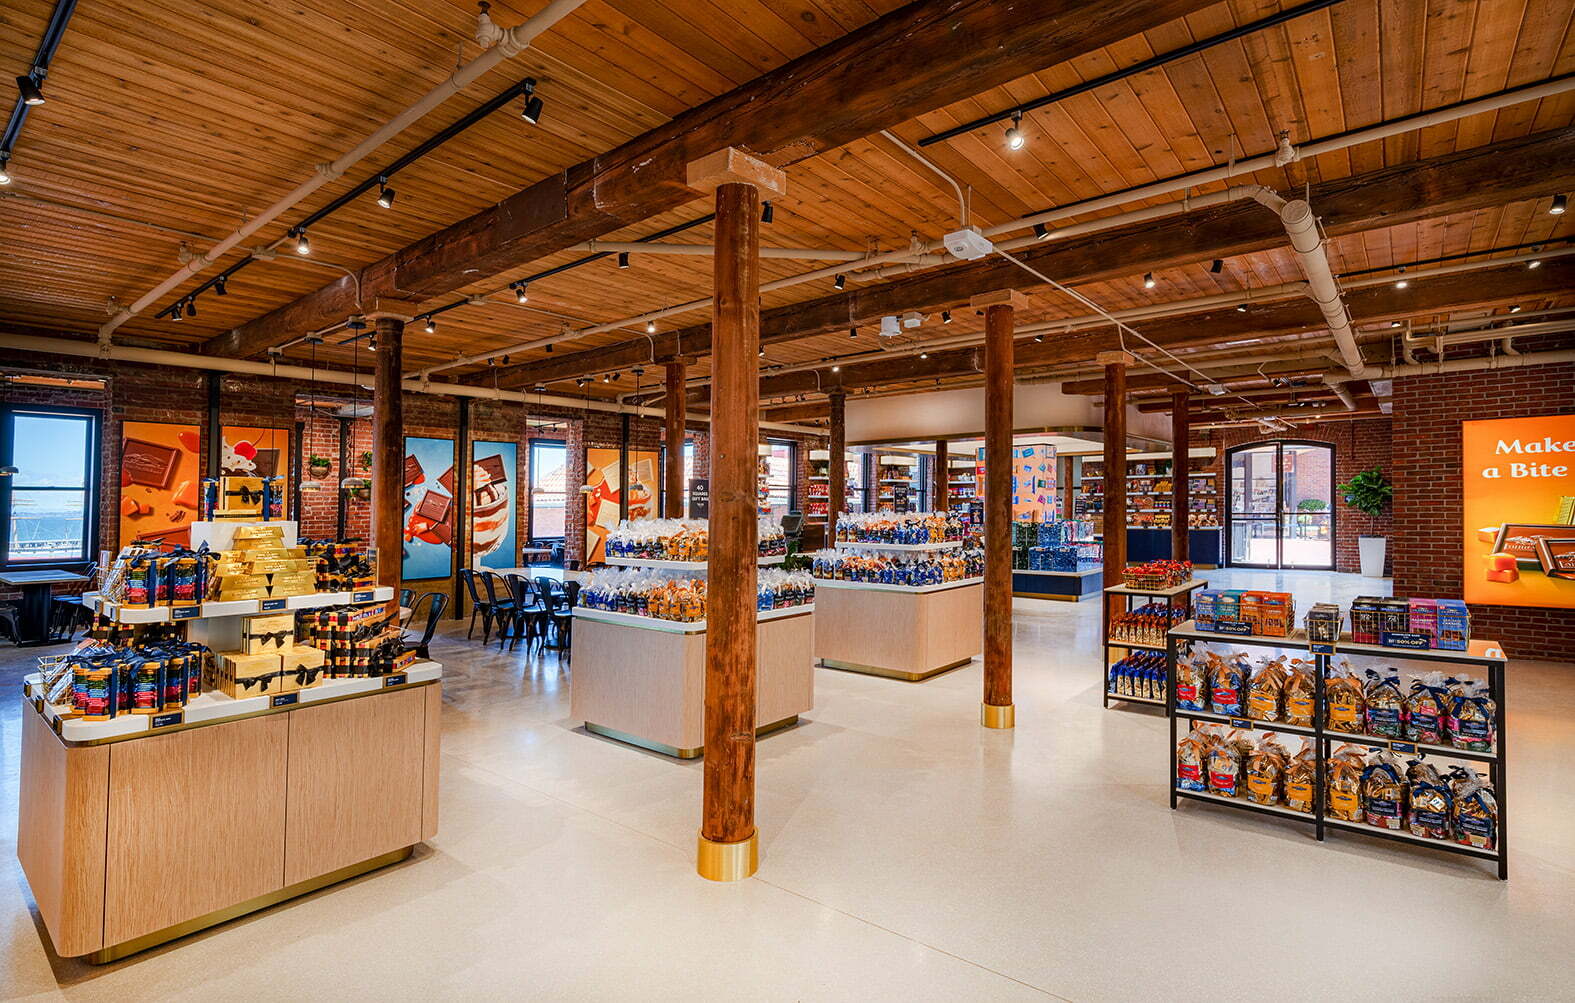 Ghirardelli’s flagship Chocolate Experience Store in San Francisco